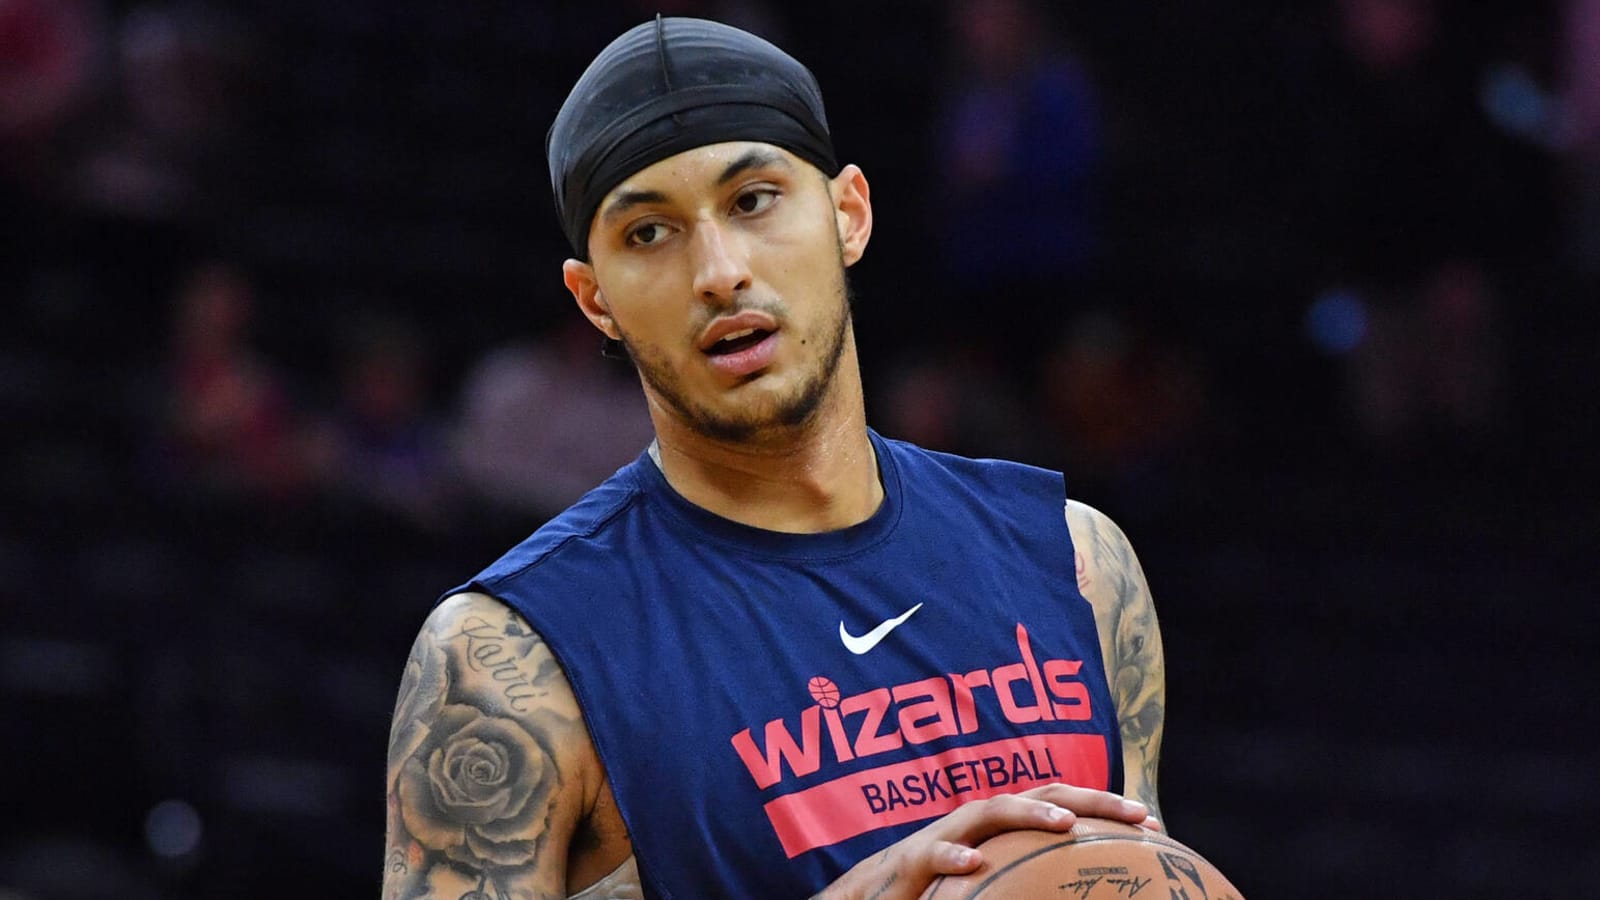 Wizards star has harsh words for new NBA jerseys